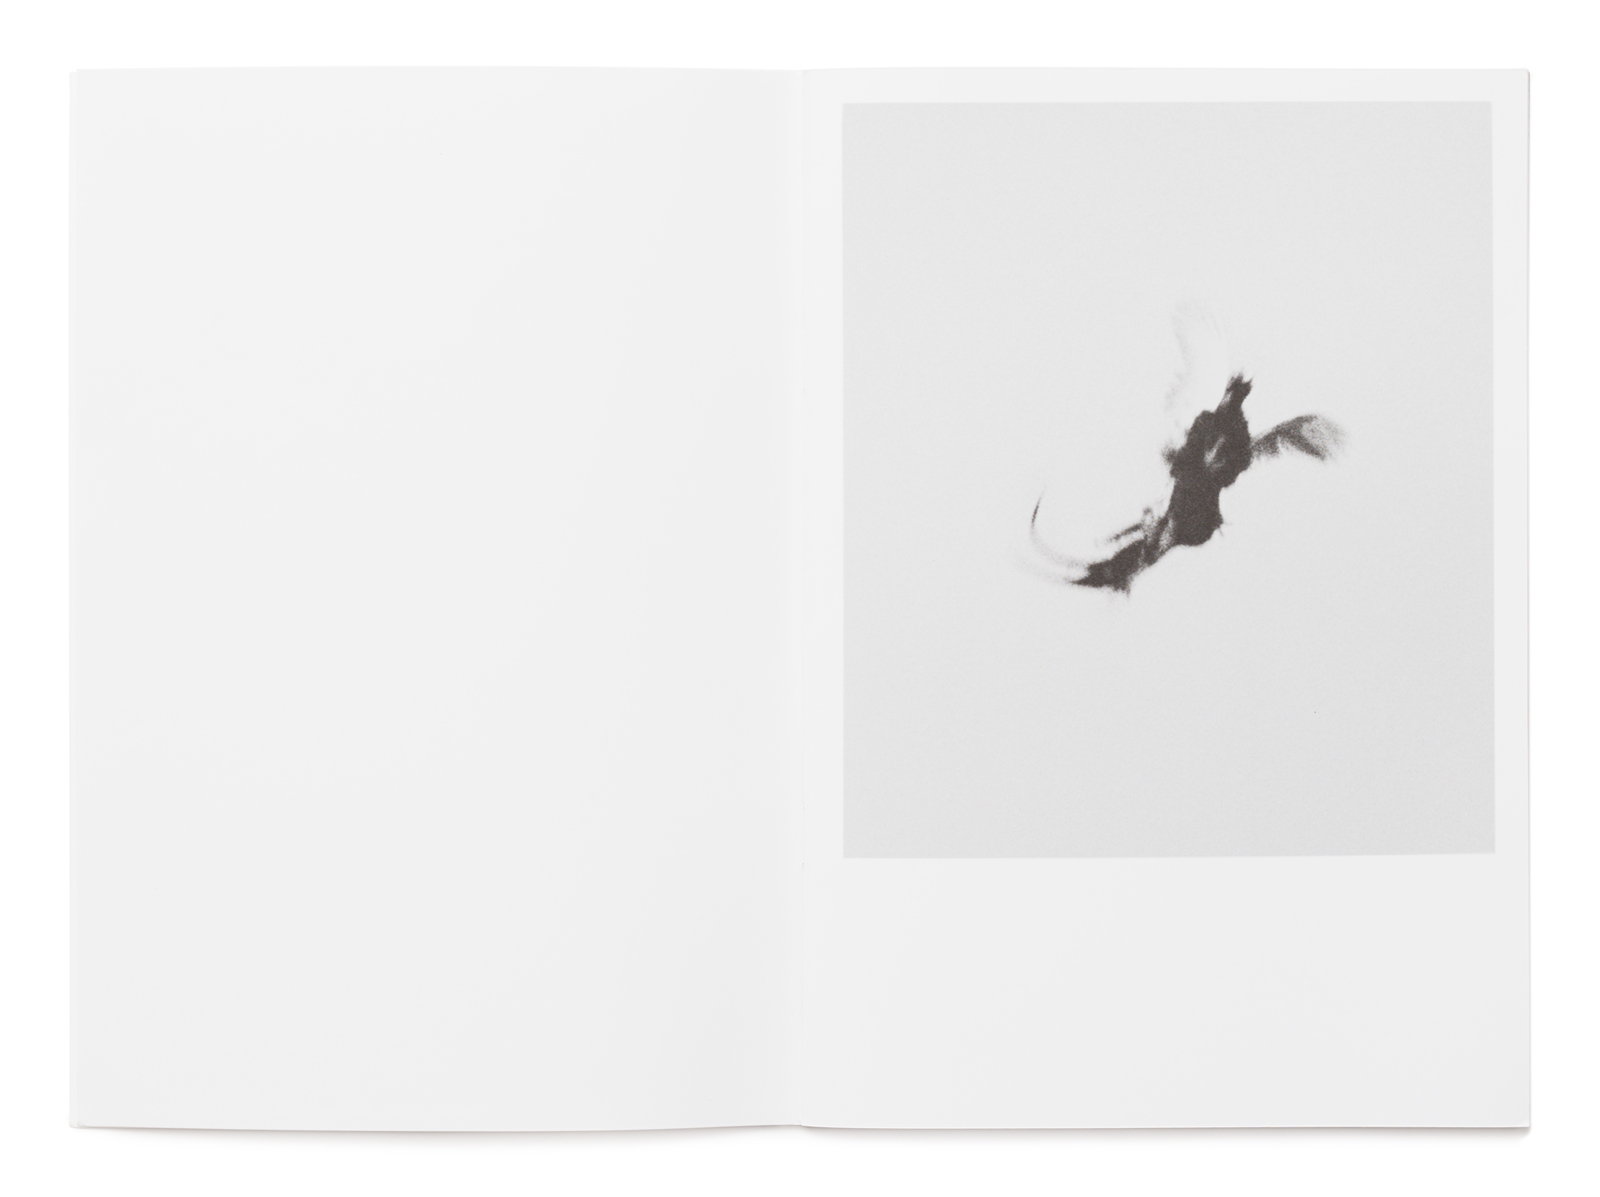 Image of the booklet Dying birds by søndergaard and howalt